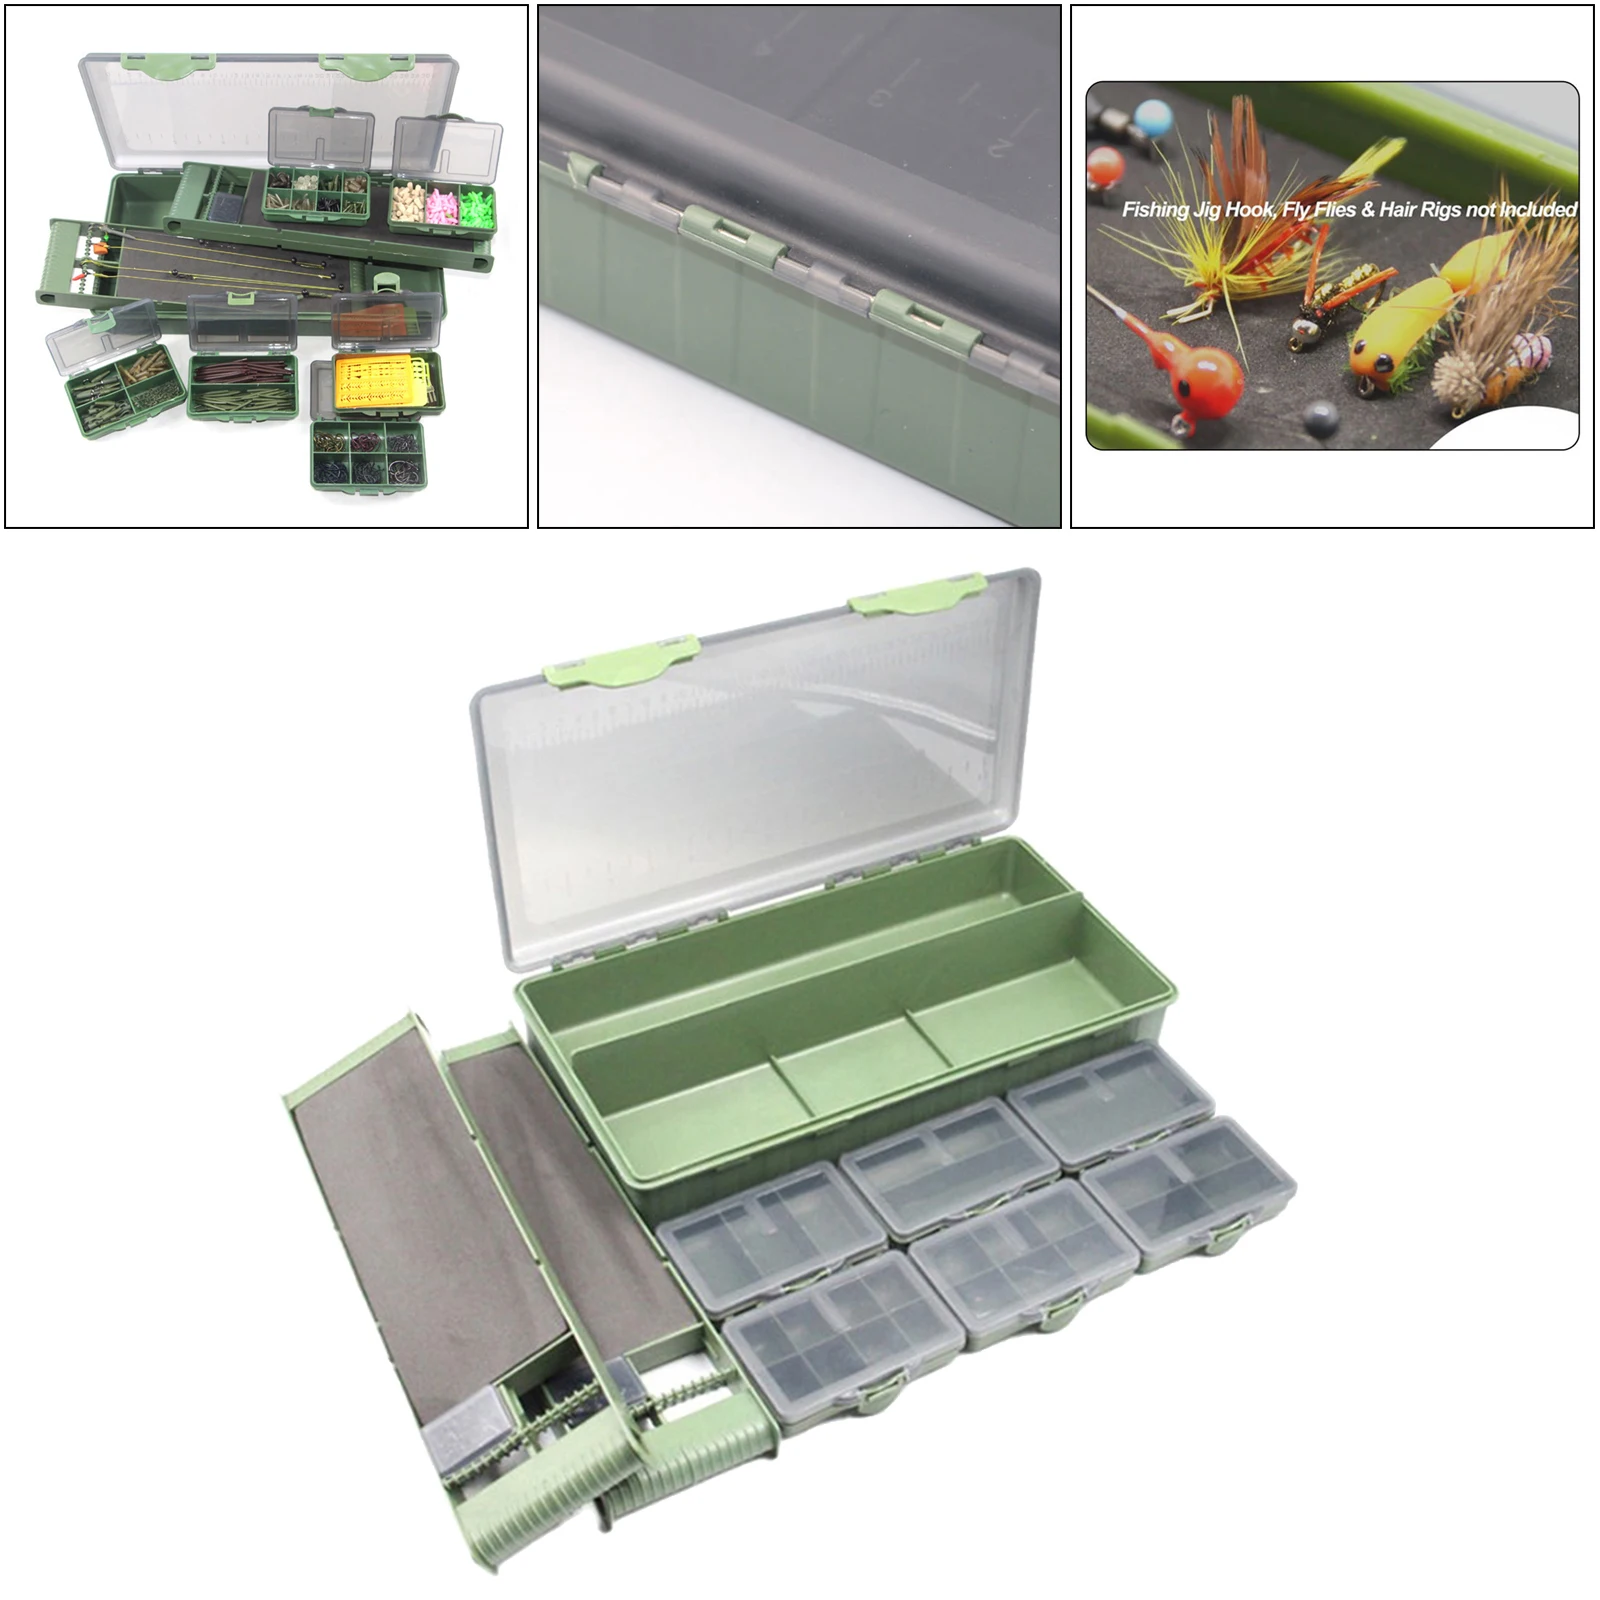 Plastic Carp Fishing Tackle Box Rig and Zig Storage Box Organizer Container Compartments Box Bait Fishing Tools